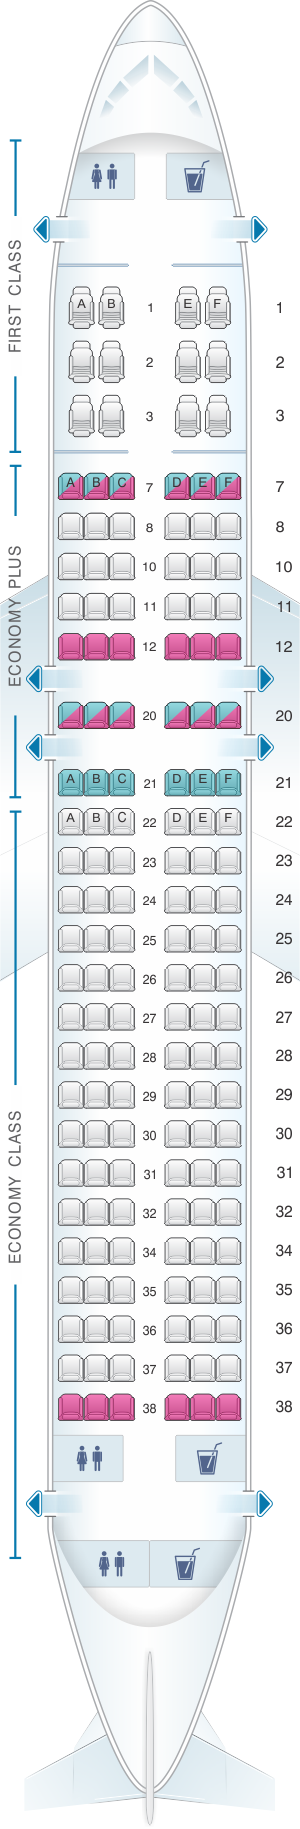 Seat Map United Airlines Airbus A320 | SeatMaestro